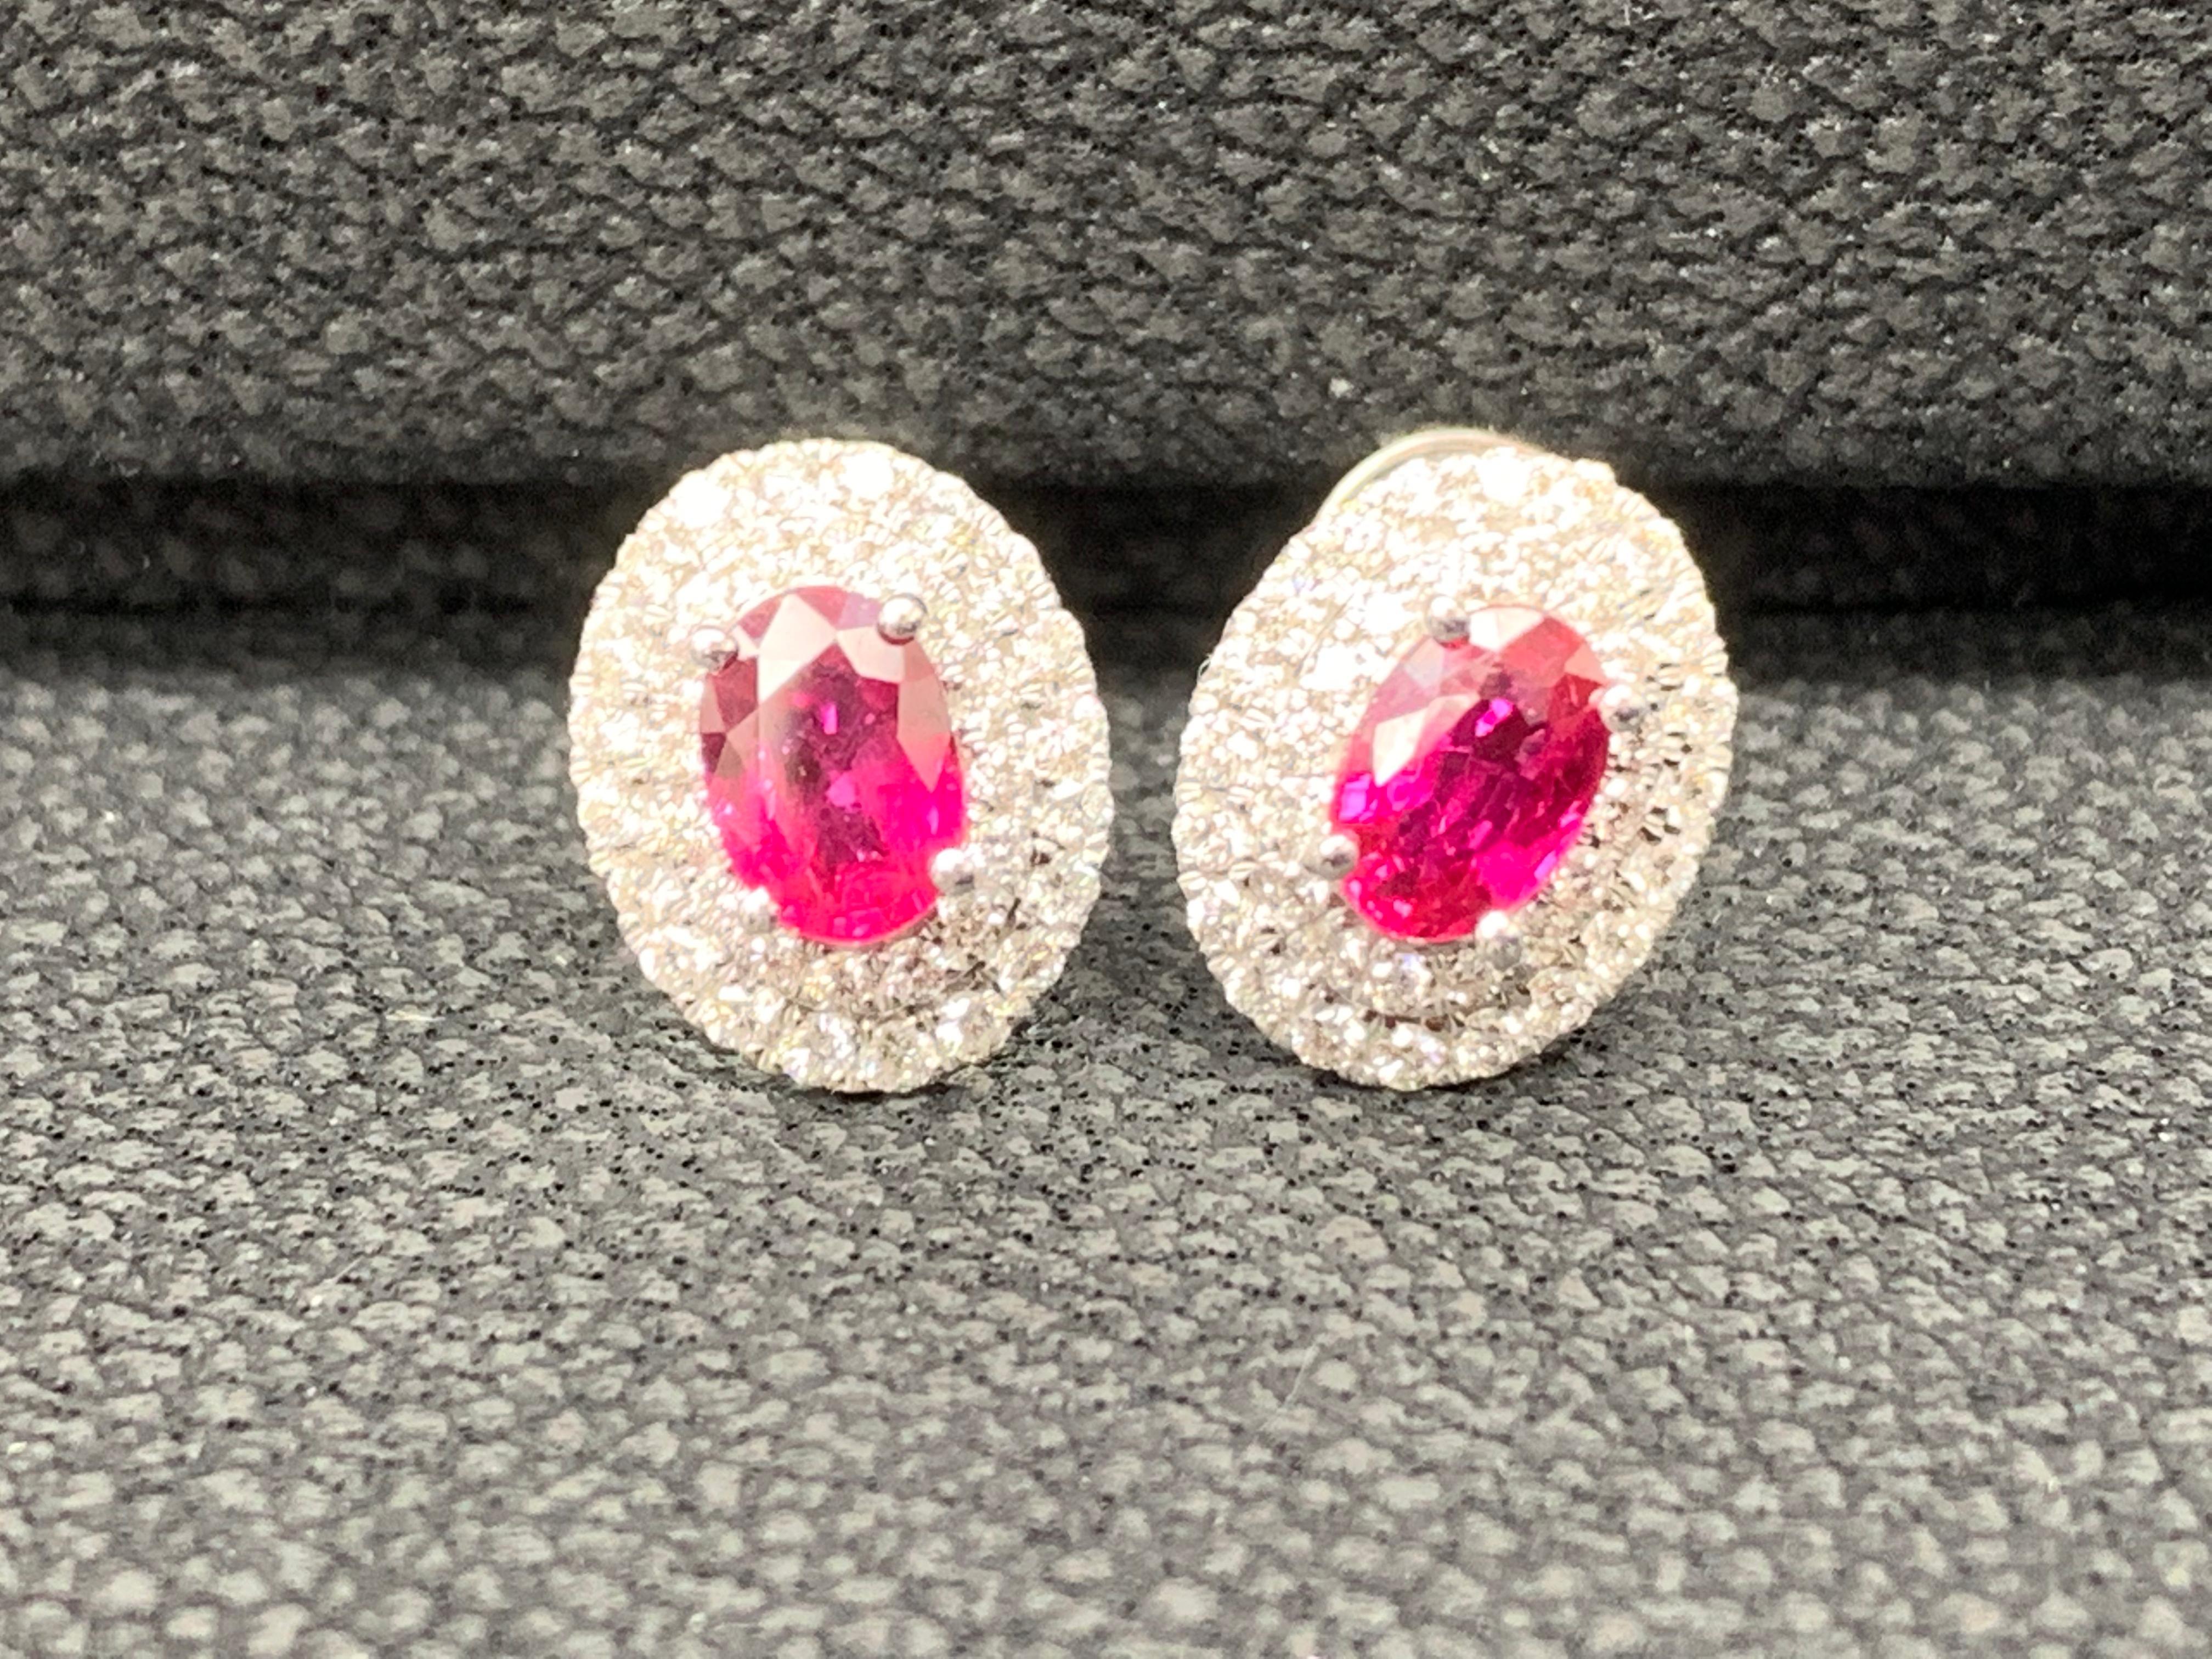 A simple pair of stud earrings showcasing 0.98 carats of oval cut red rubies, surrounded by a double row of 72 round brilliant diamonds weighing 0.48 carat. Made in 18 karat white gold.